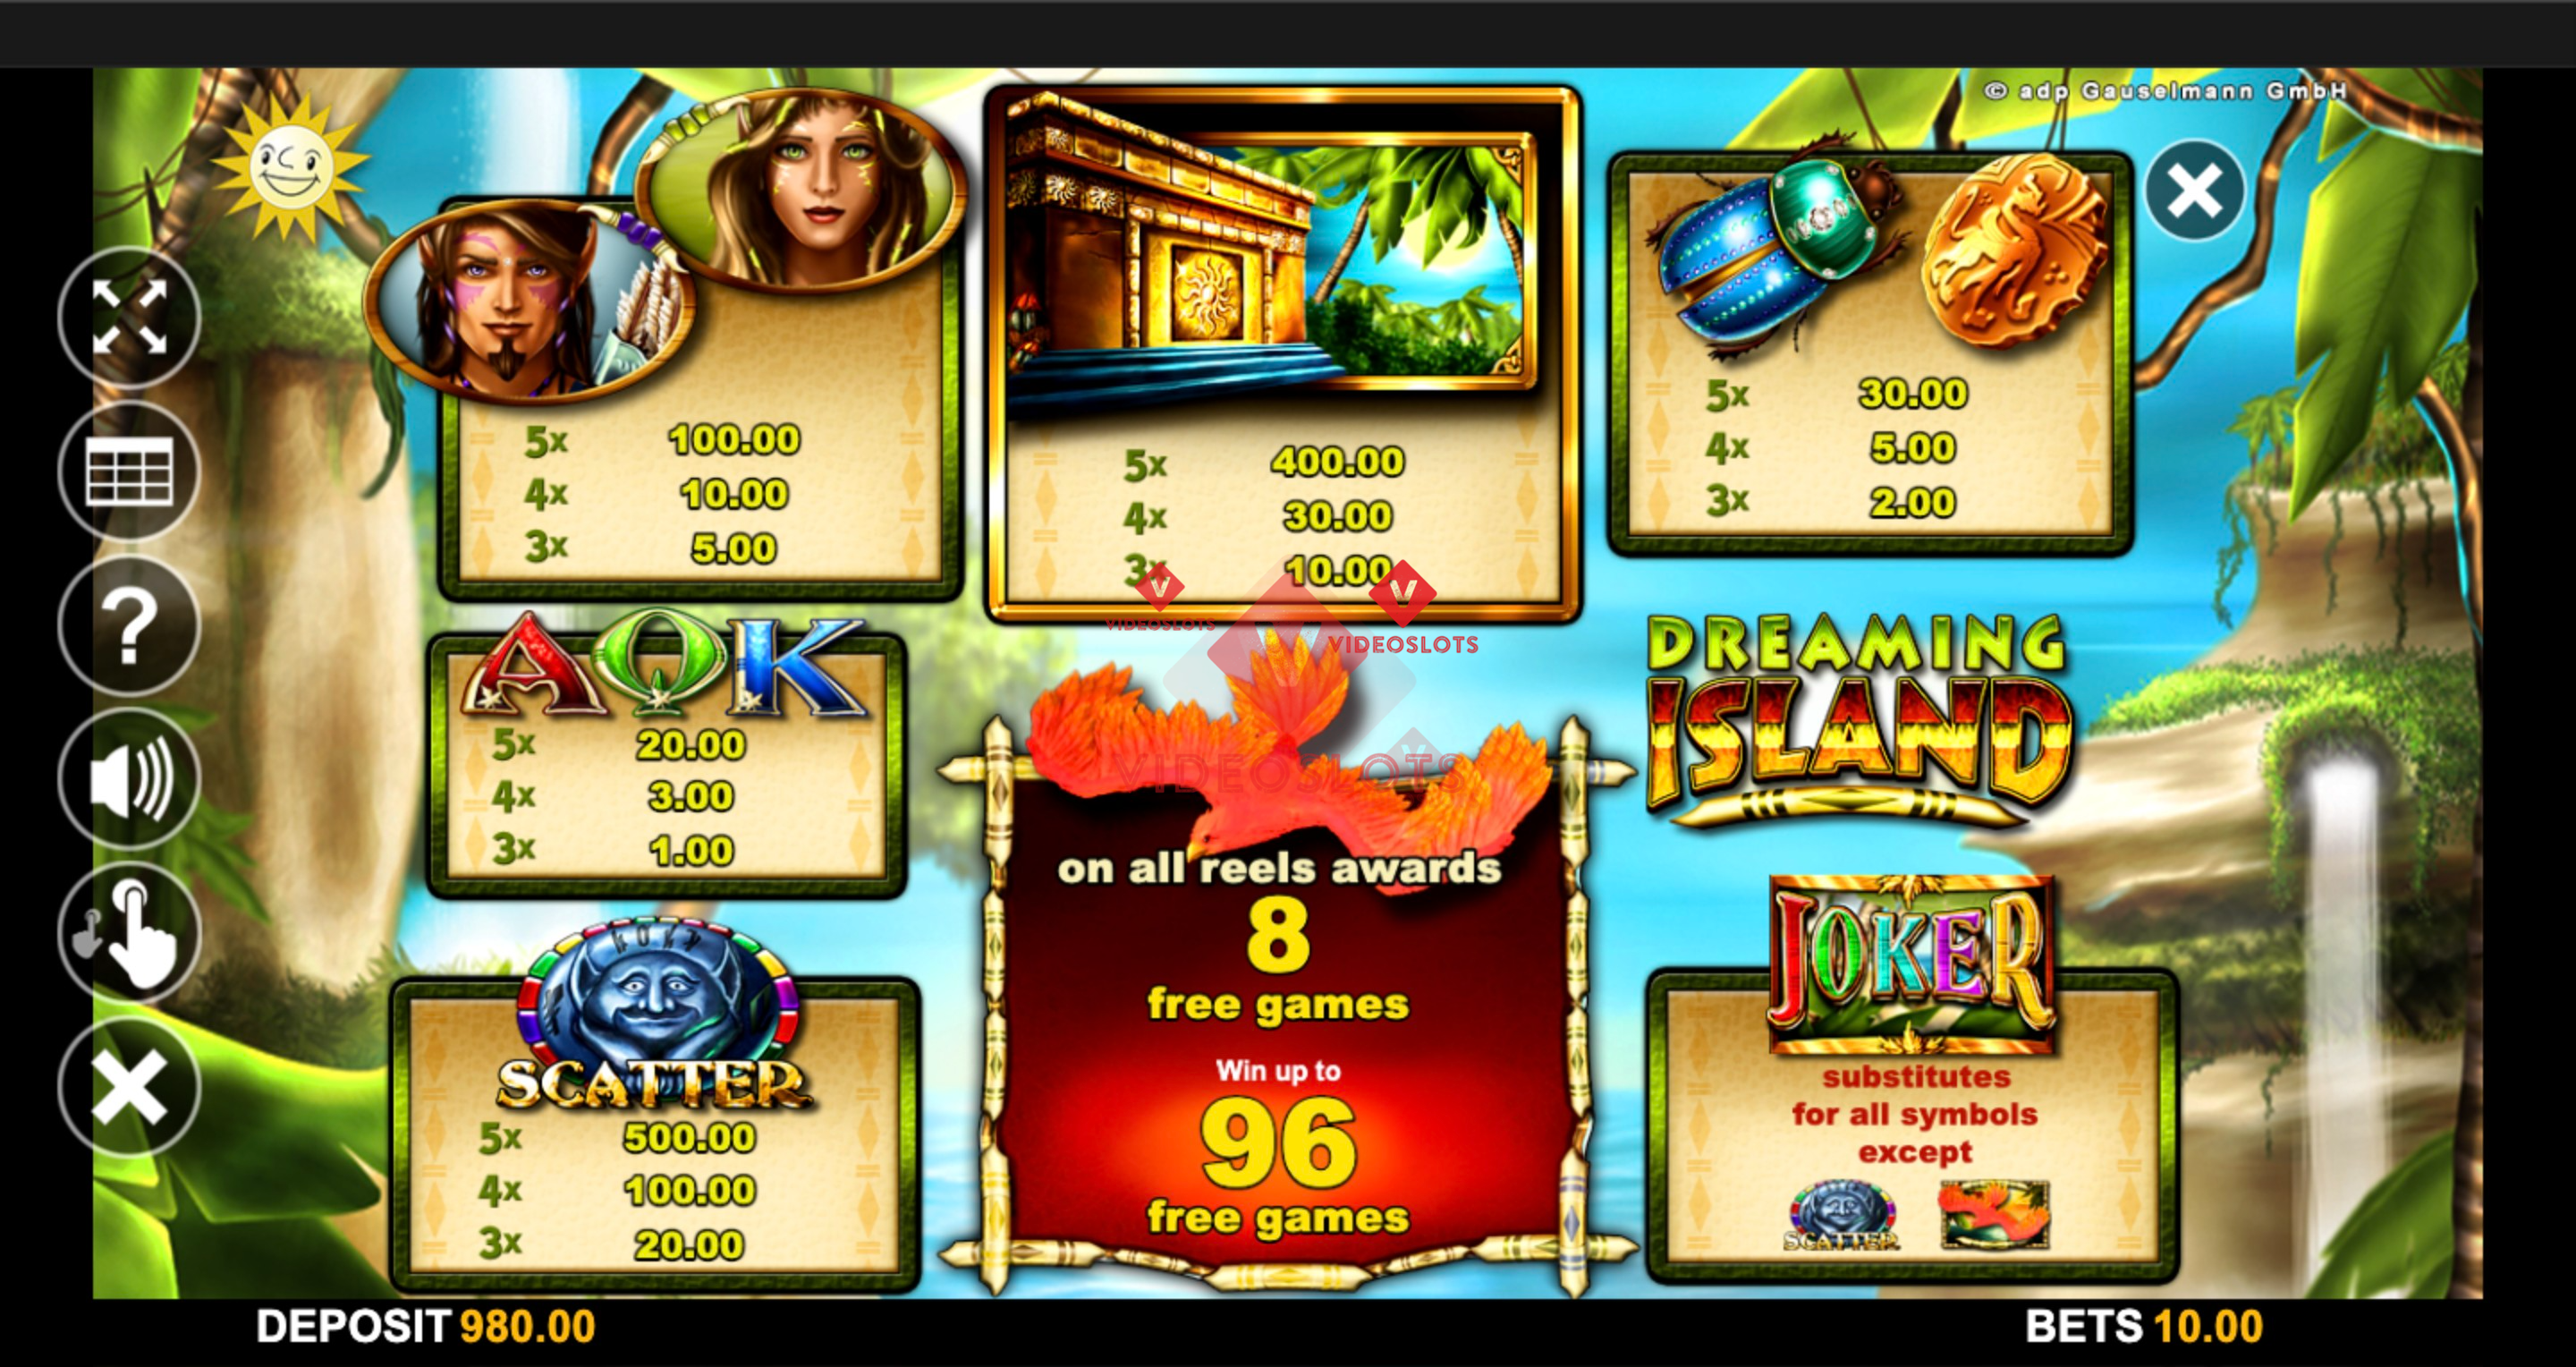 Pay Table for Dreaming Island slot from Merkur